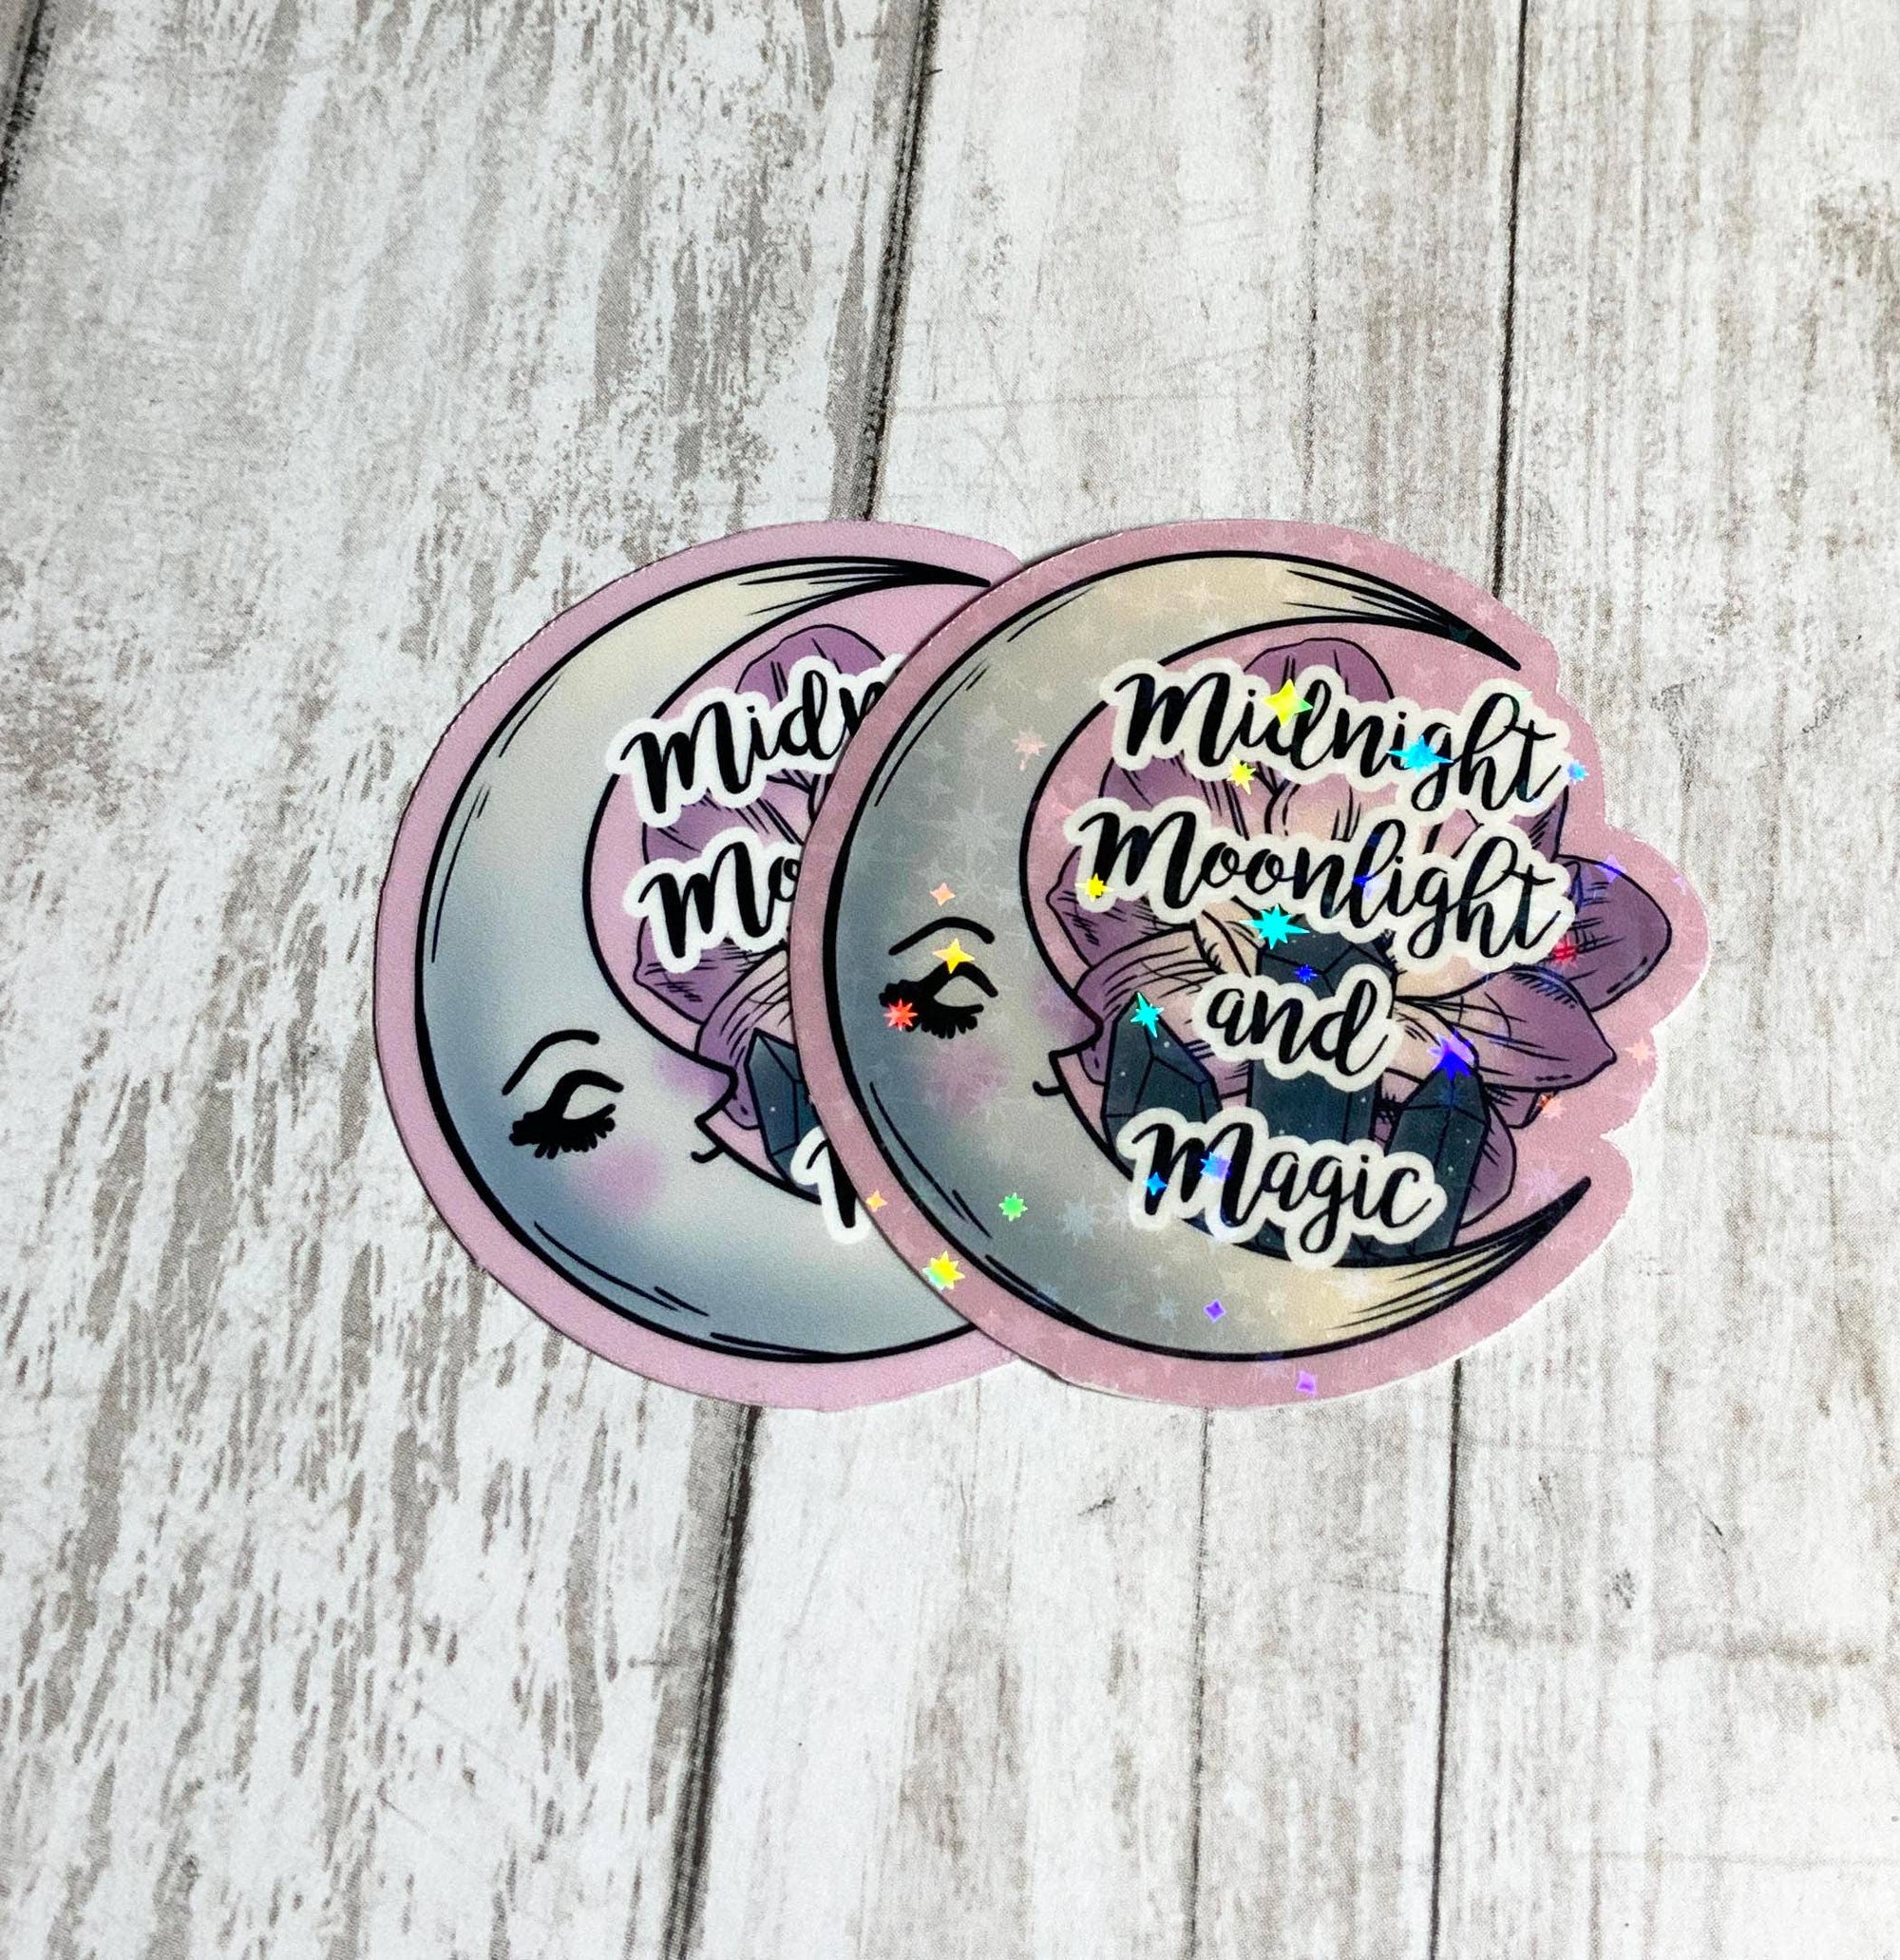 Midnight Moonlight and Magic Witchy Vinyl Sticker